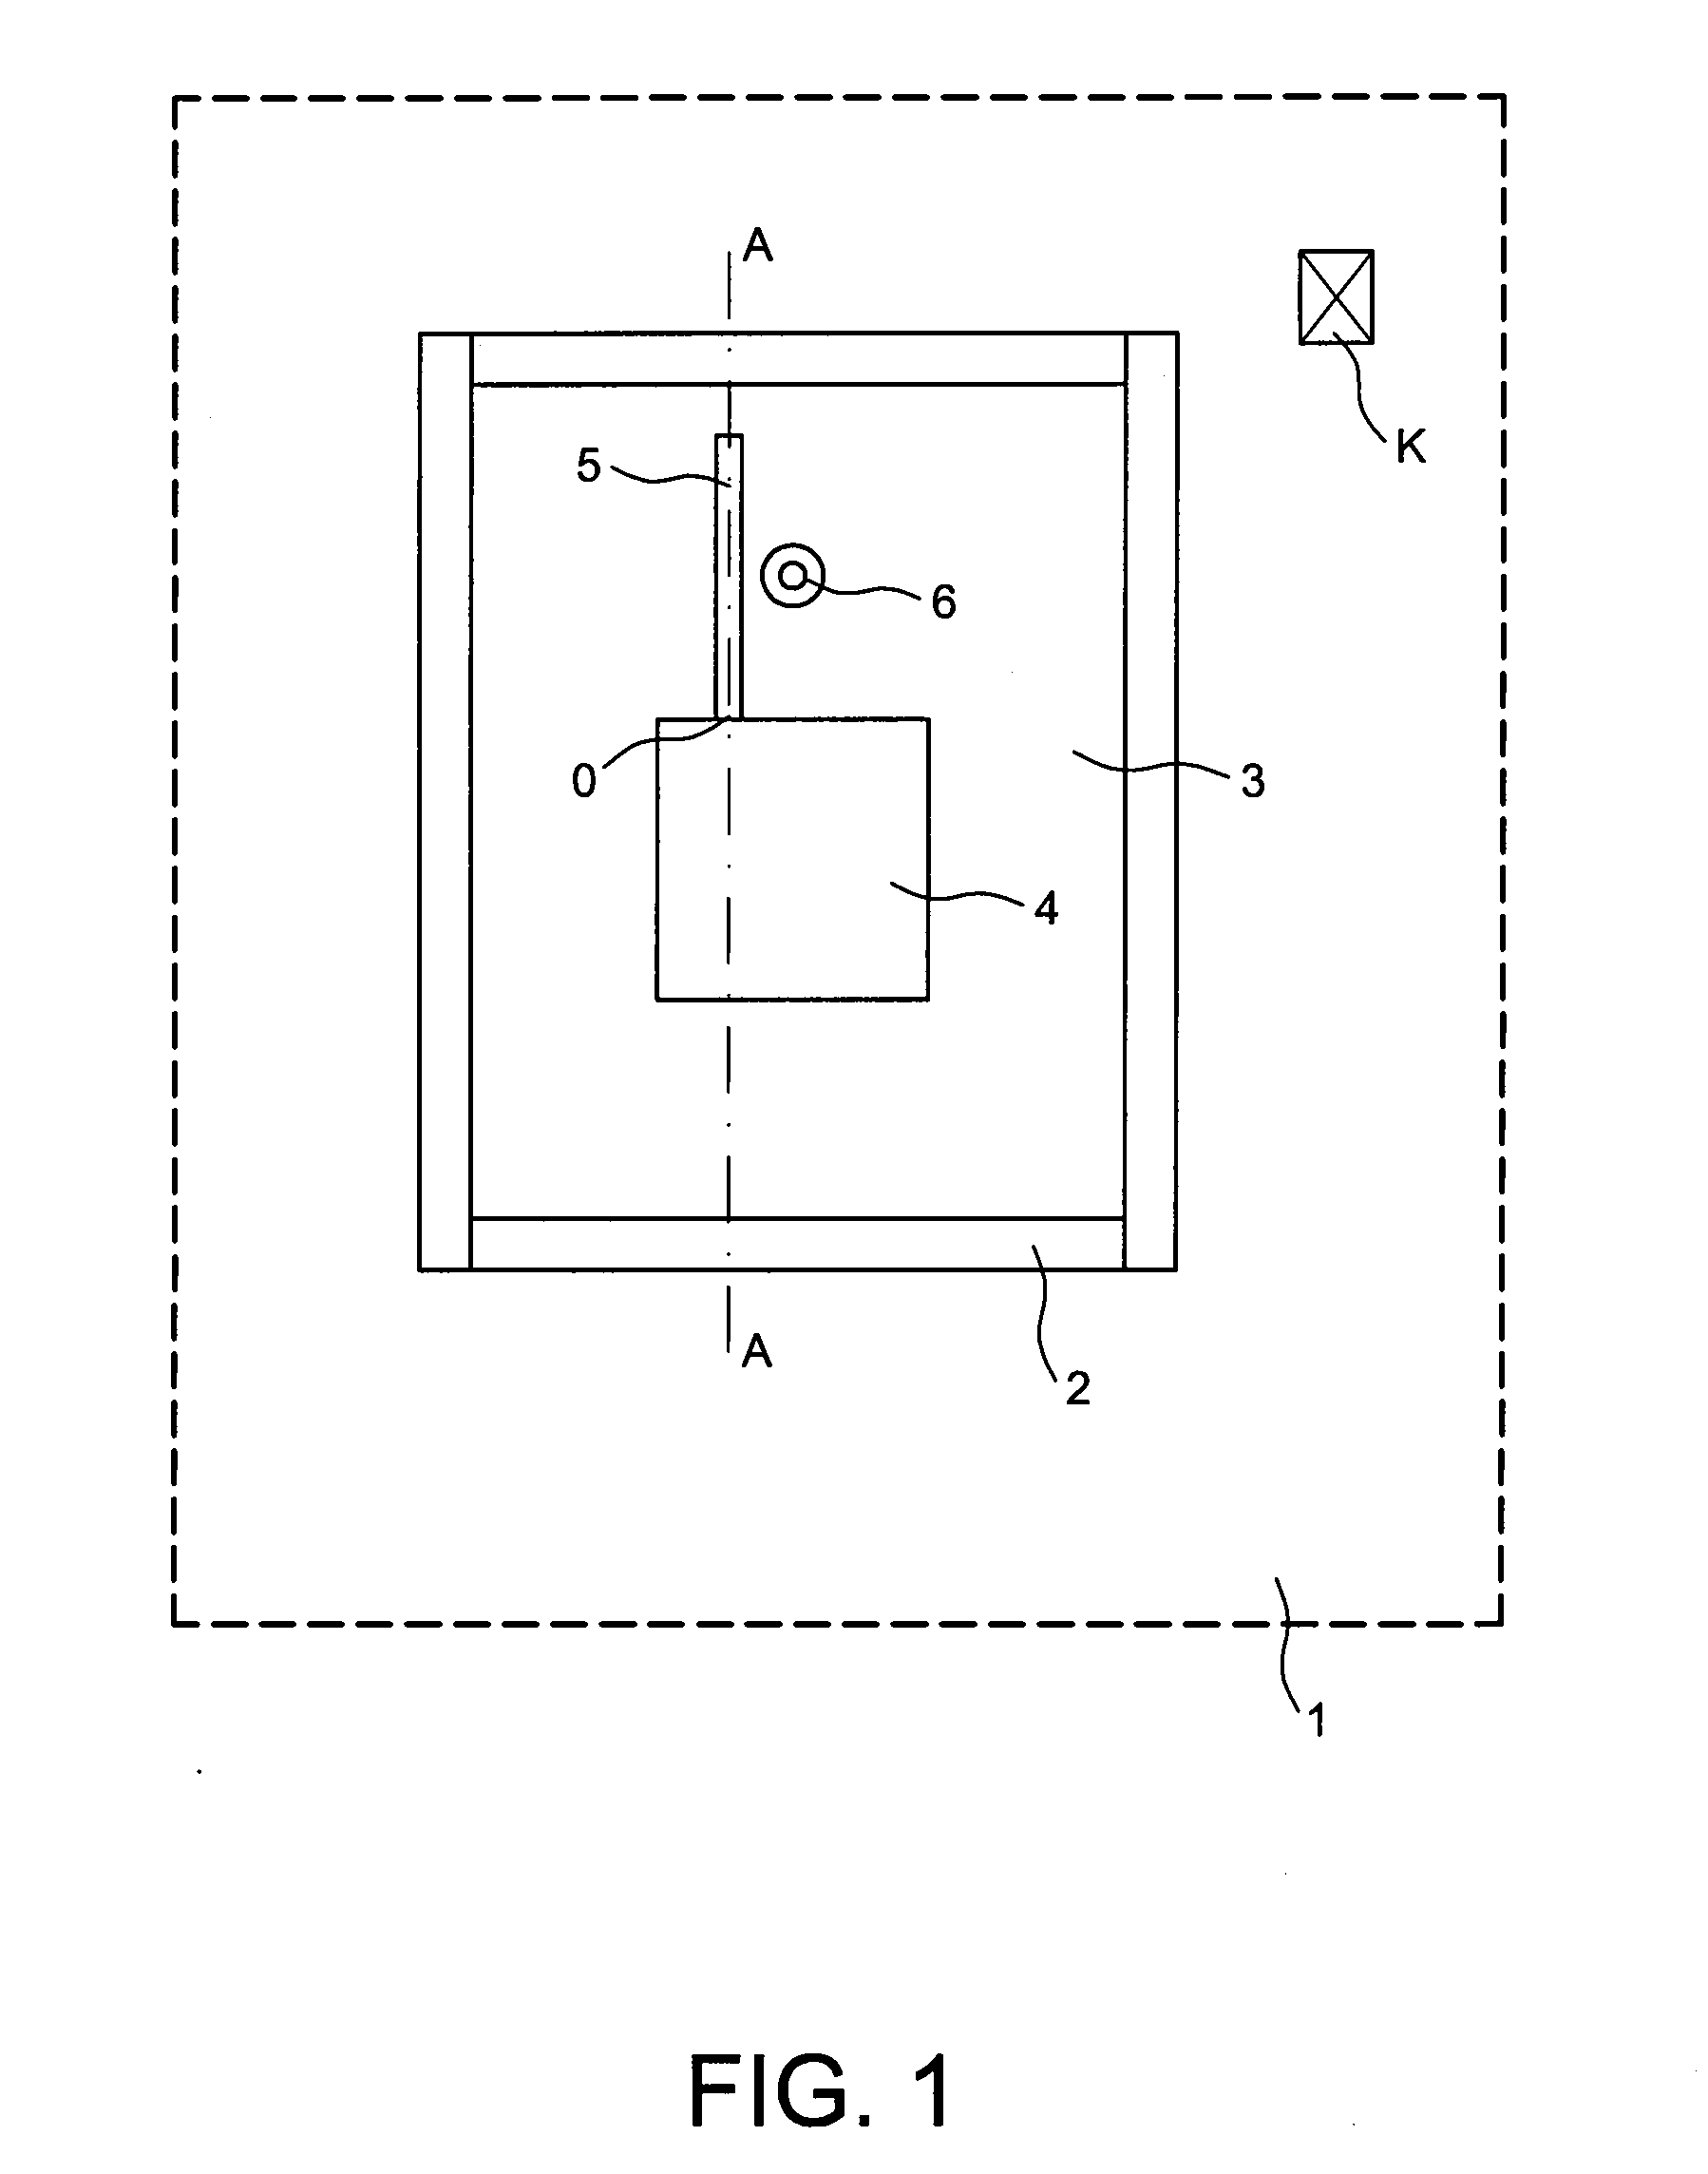 Count rate measurement device and associated fission chamber calibration device